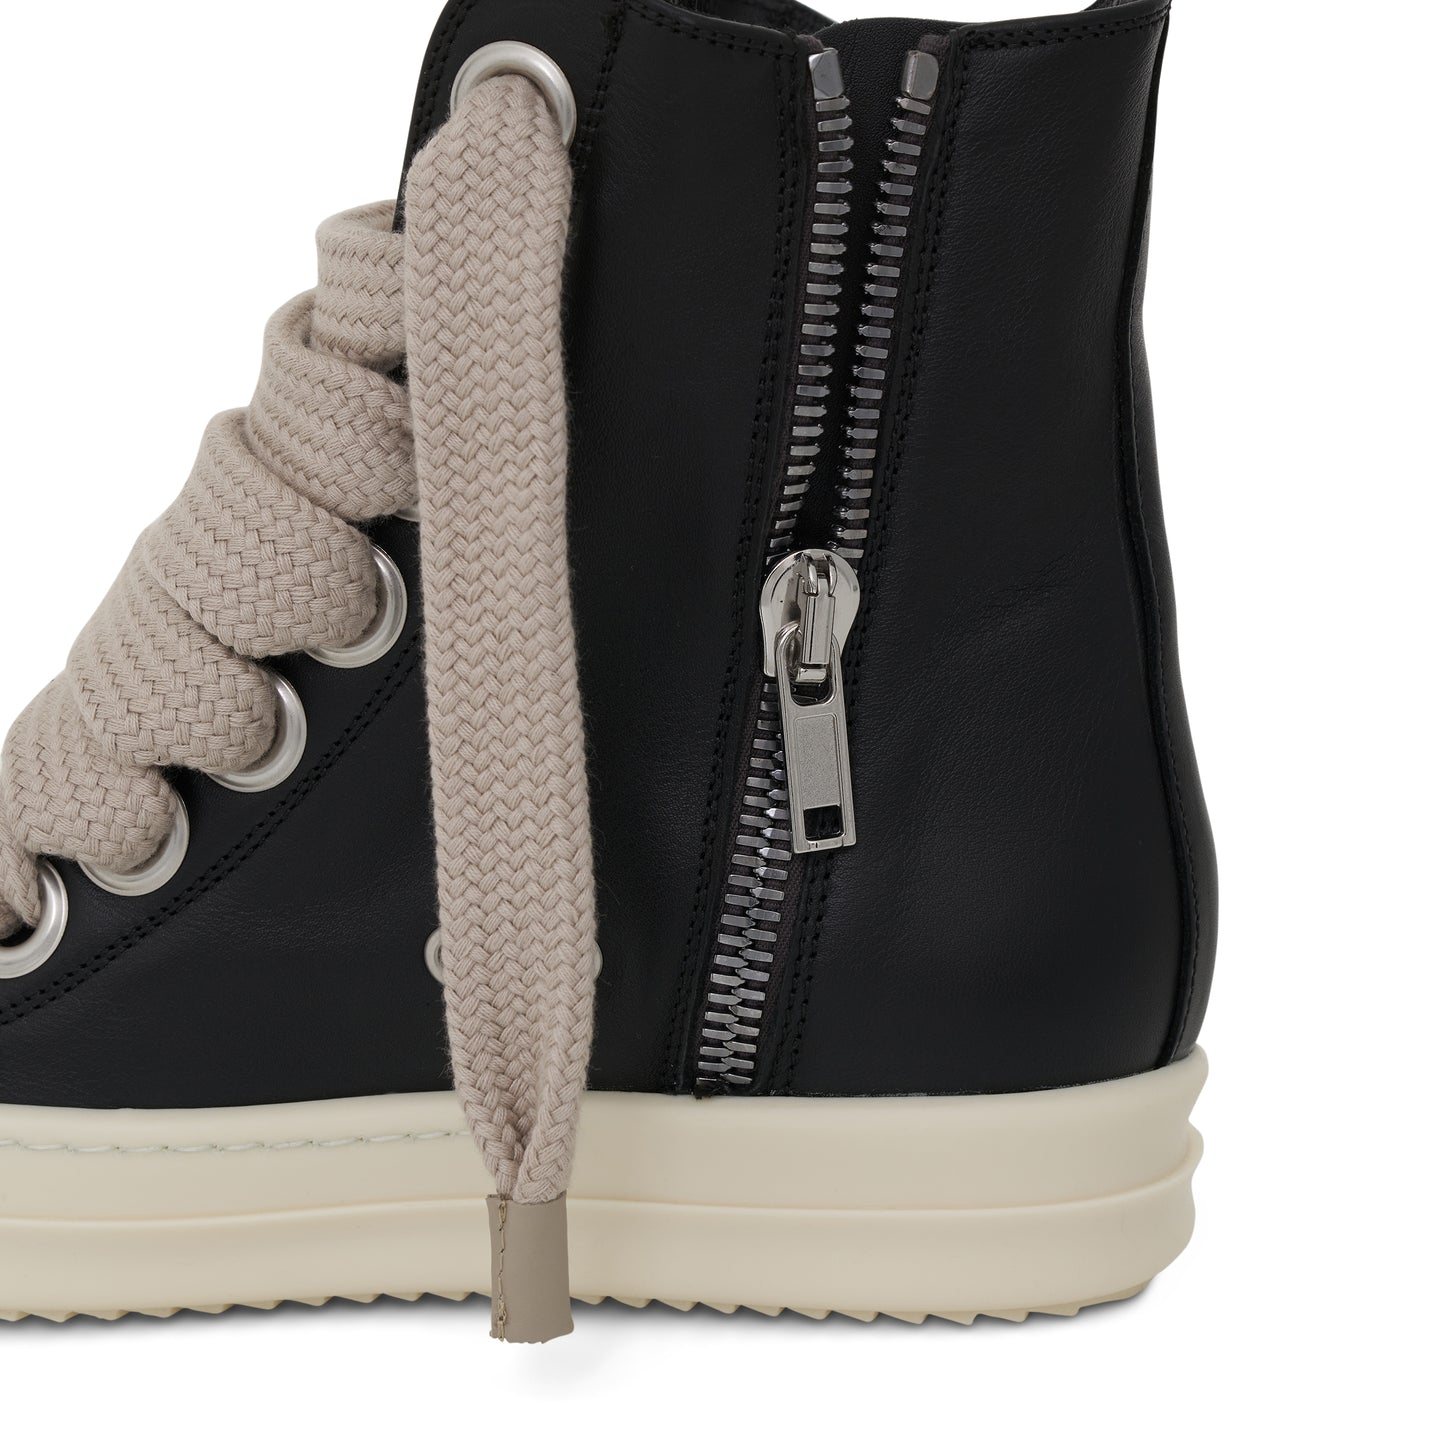 High Top Sneaker with Jumbo Laces in Black/Milk